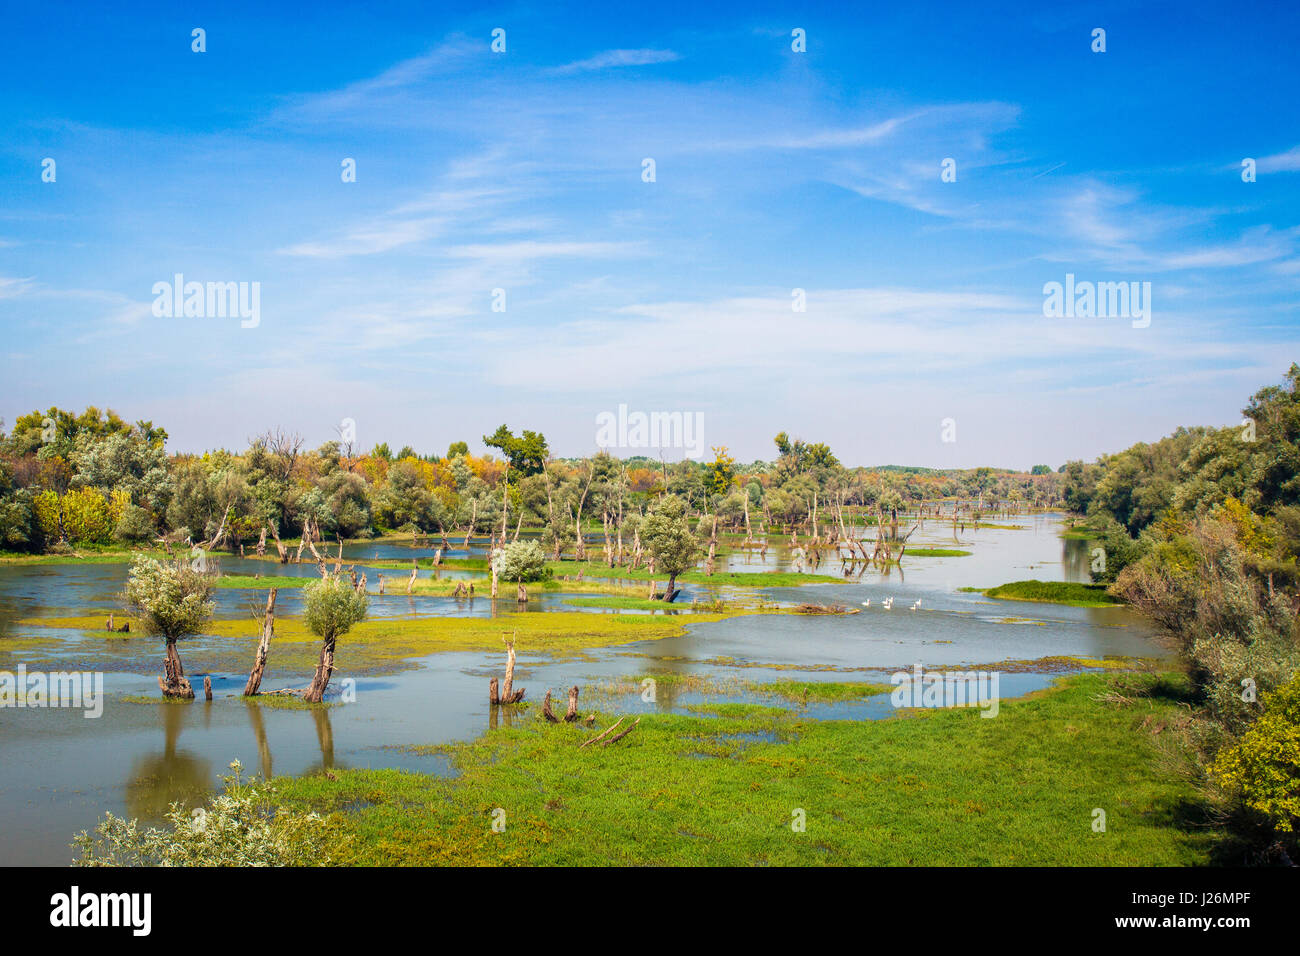 Tamis High Resolution Stock Photography and Images - Alamy